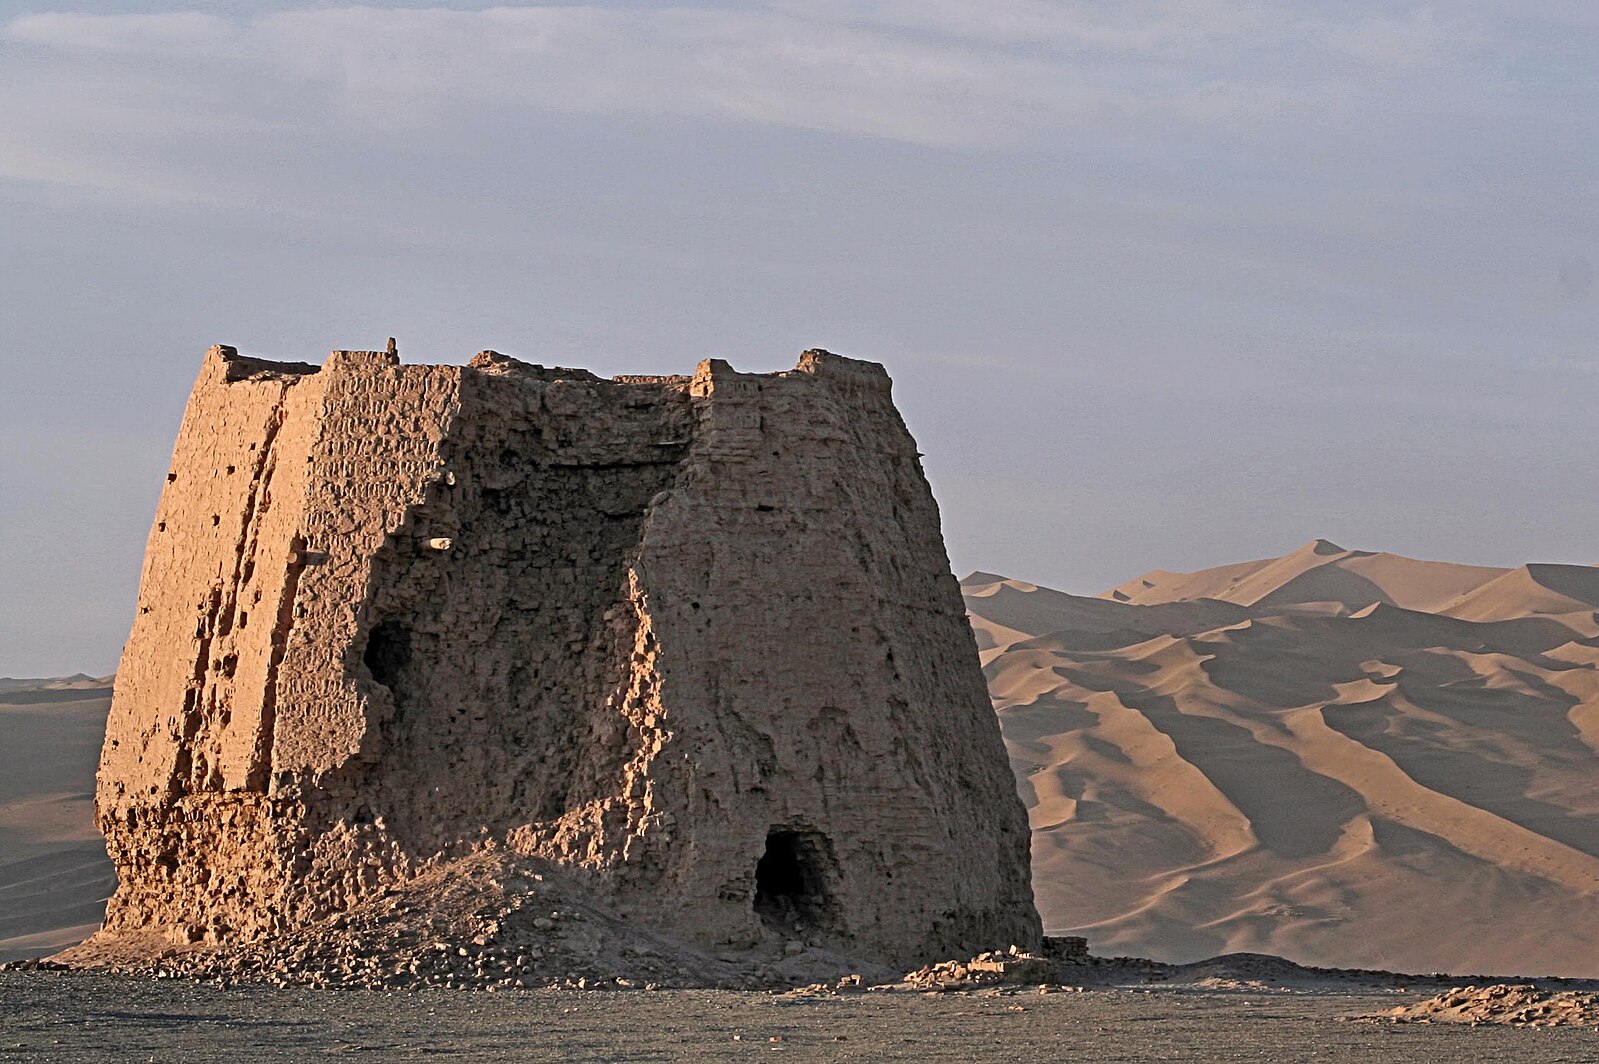 Summer_Vacation_2007,_263,_Watchtower_In_The_Morning_Light,_Dunhuang,_Gansu_Province.jpg